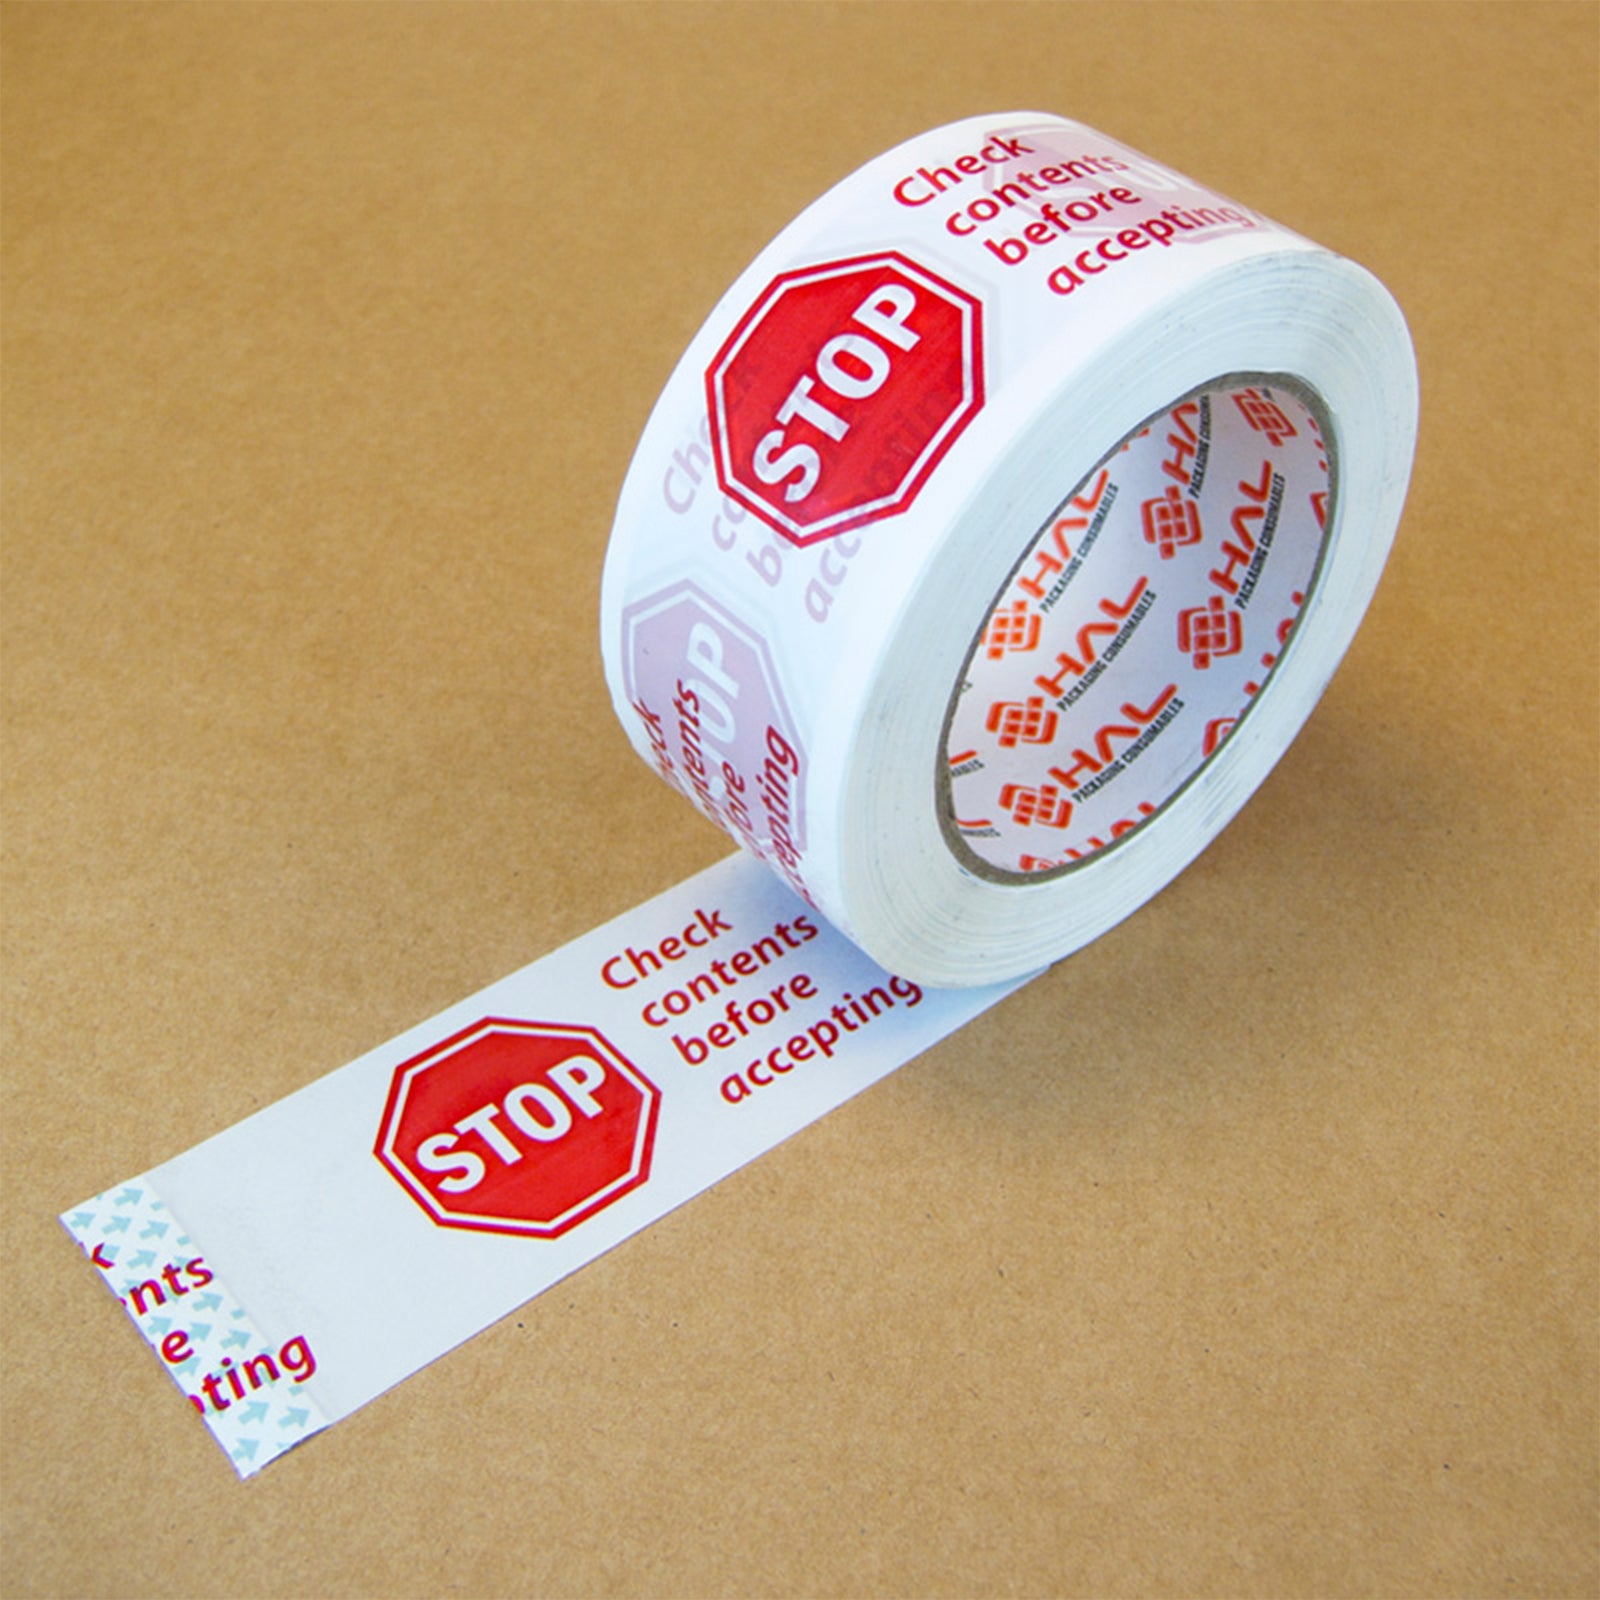 white roll of packaging tape with red stop sign and check contents before accepting message rolled onto brown box